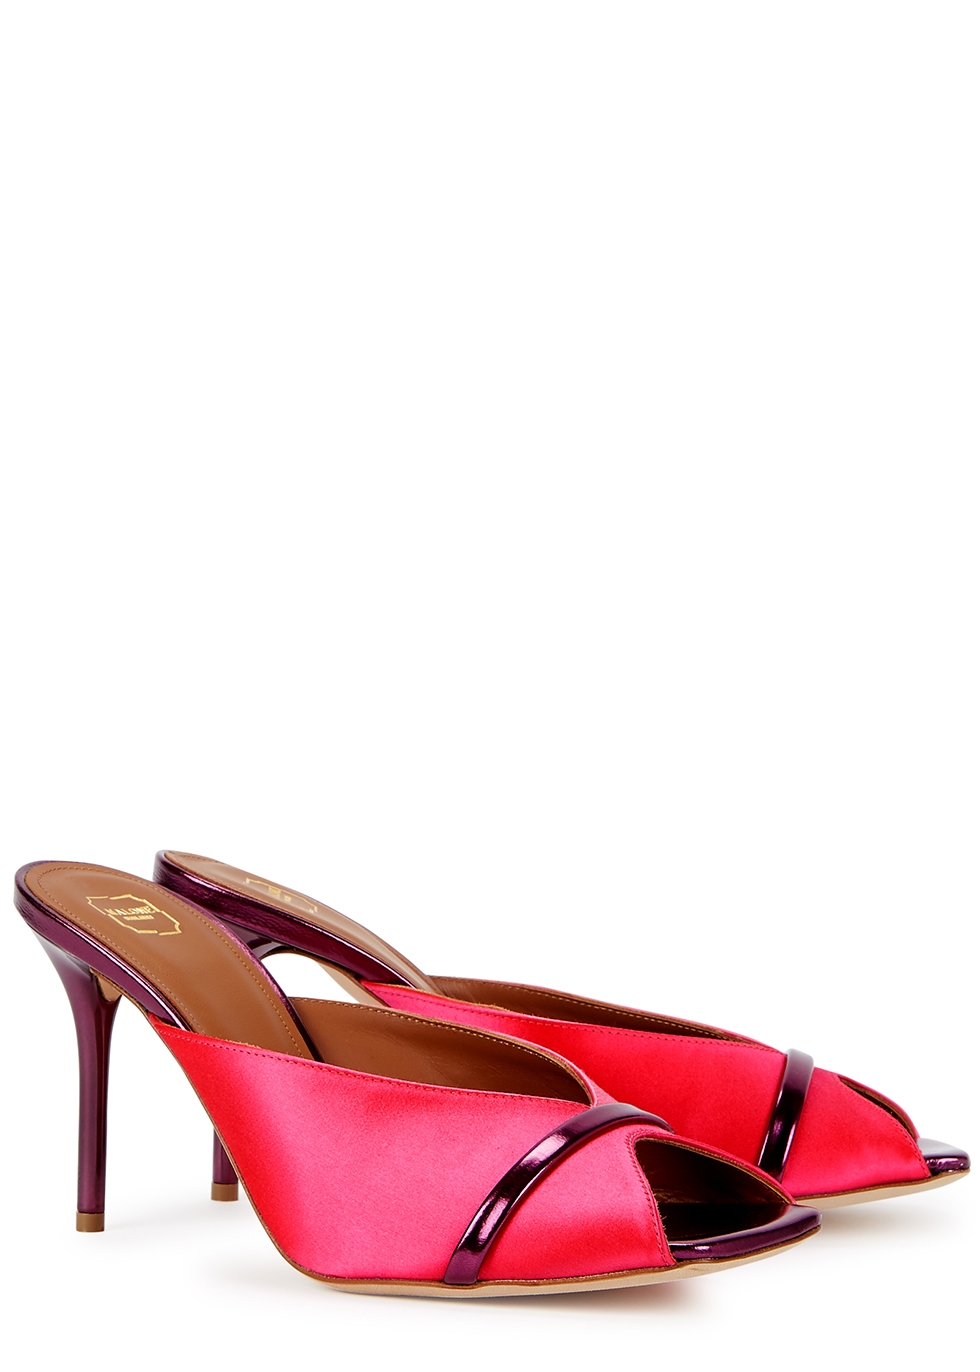 Malone Souliers Lucia 85 pink satin and 